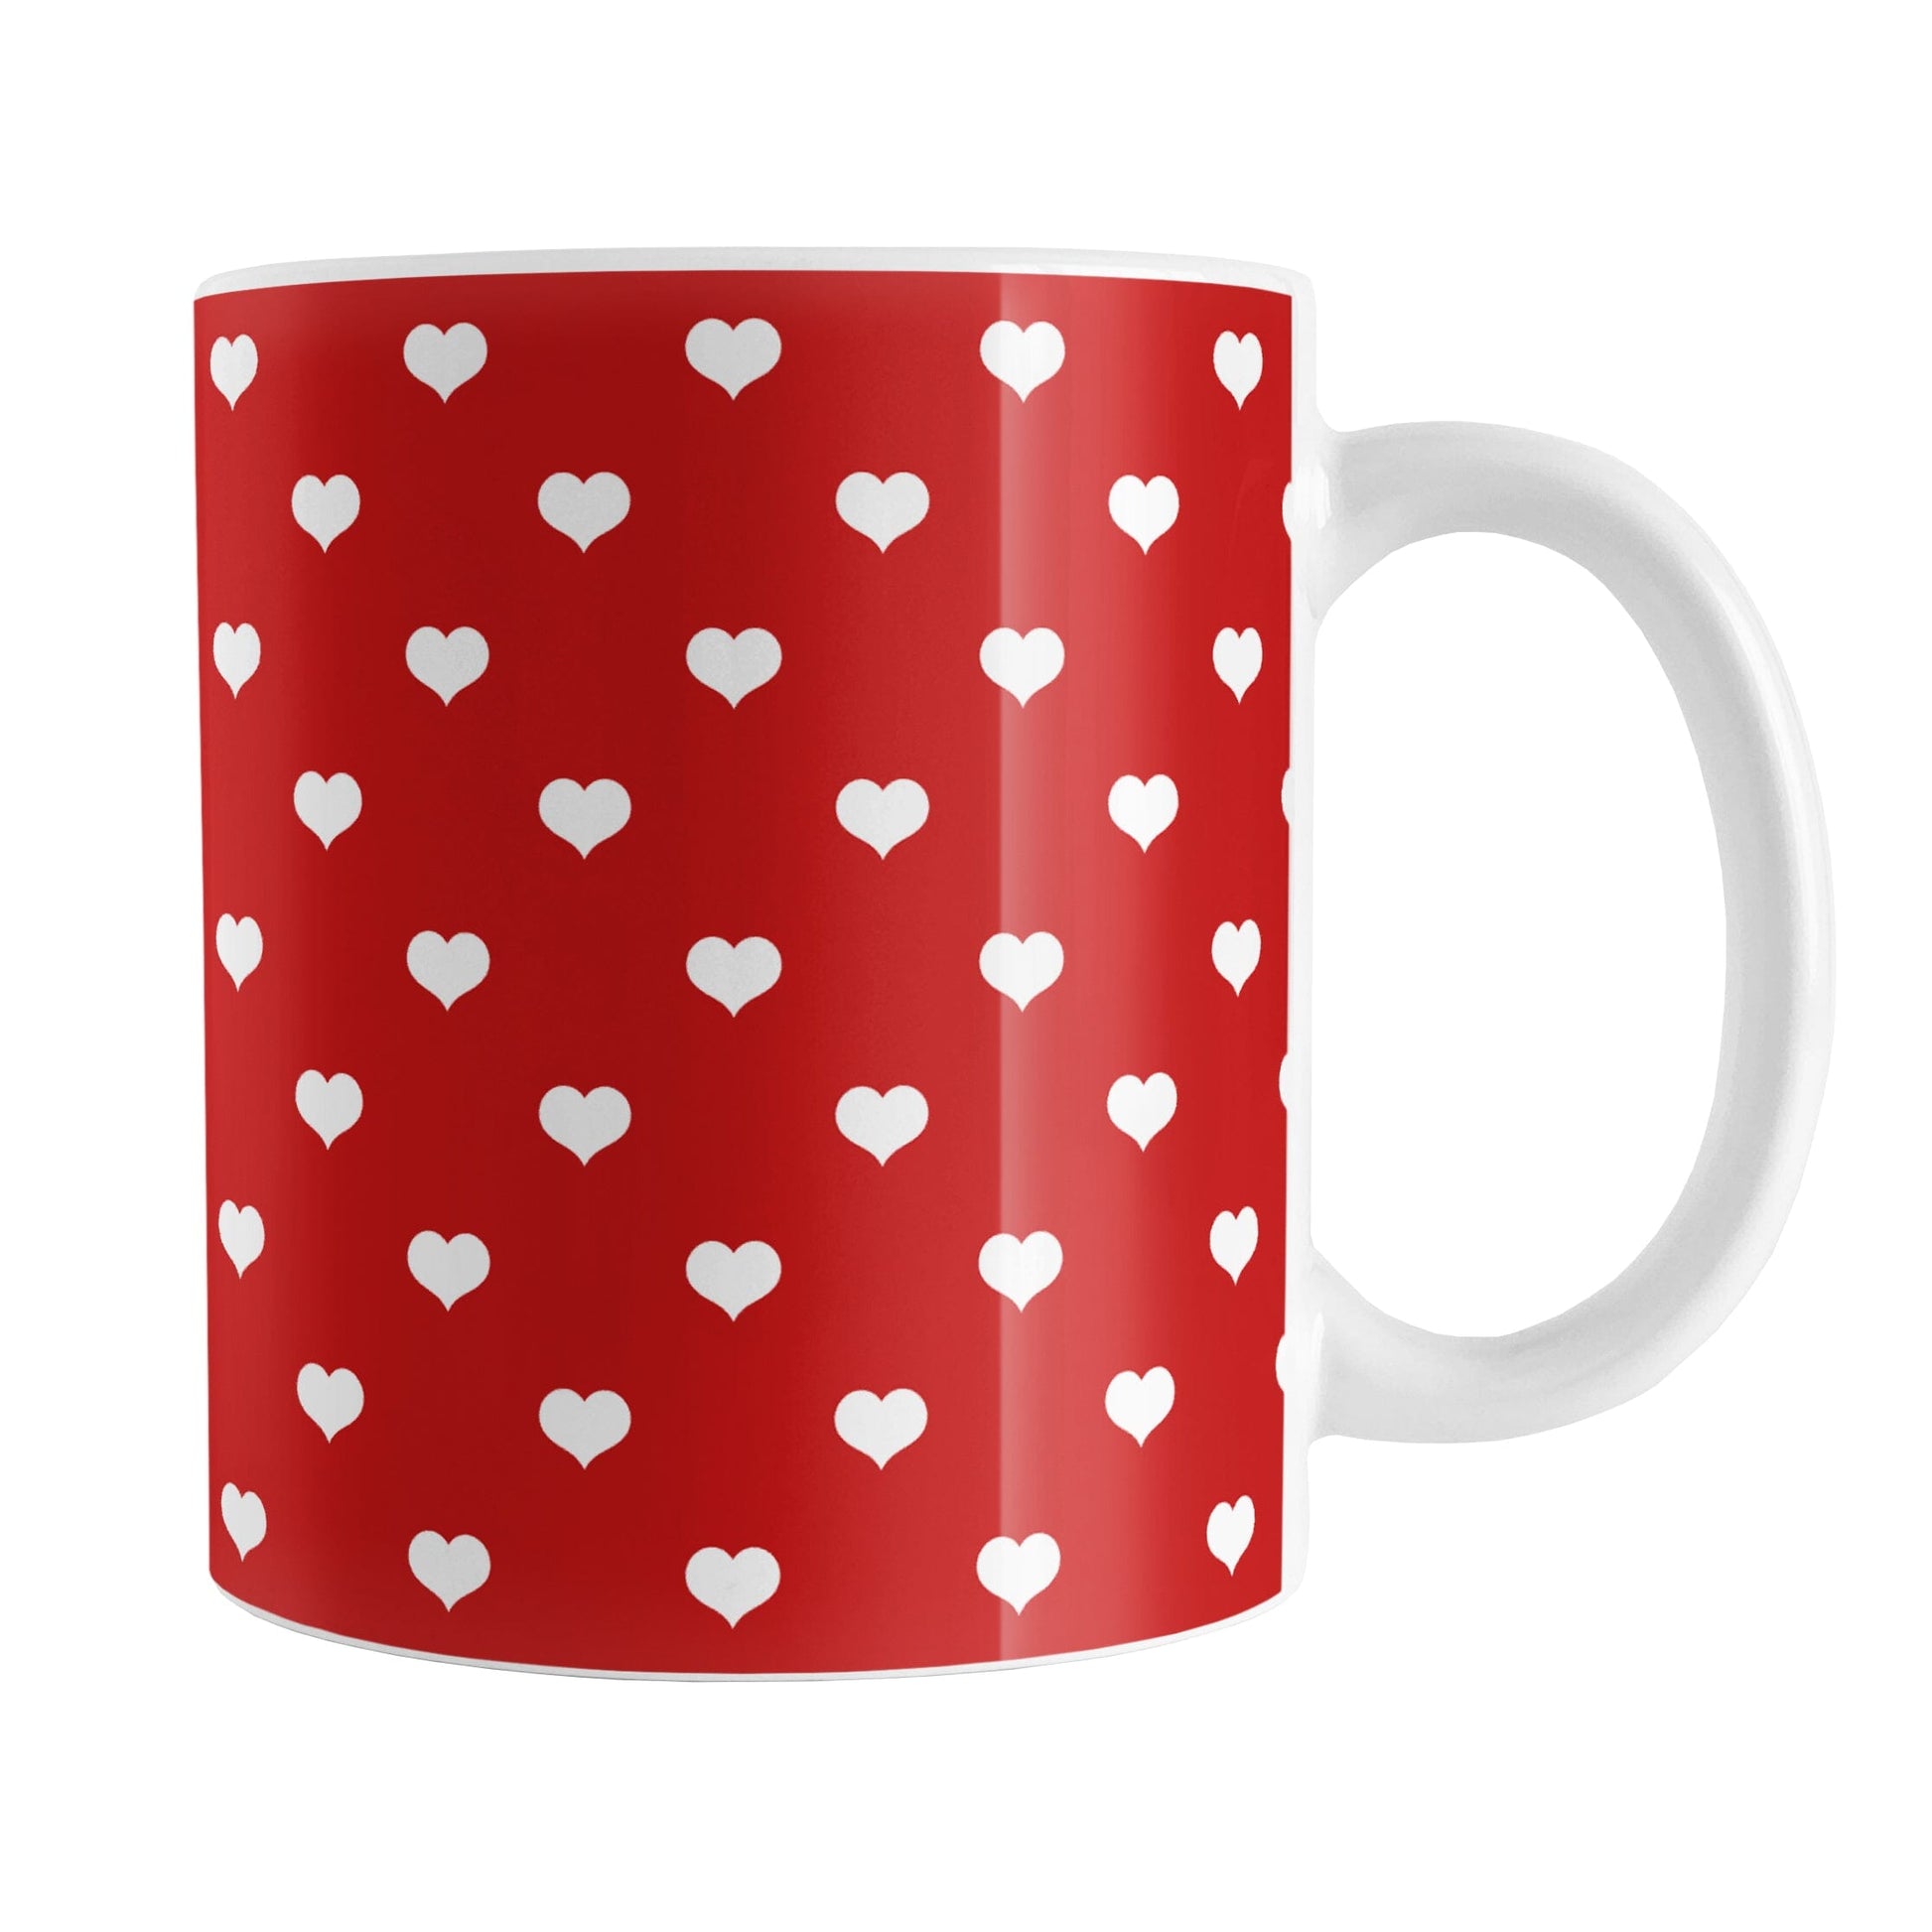 Small White Hearts Pattern Red Mug (11oz) at Amy's Coffee Mugs. A ceramic coffee mug designed with a pattern of small white hearts over a red background color that wraps around the mug to the handle. It's the perfect mug for anyone who loves hearts and the color red.